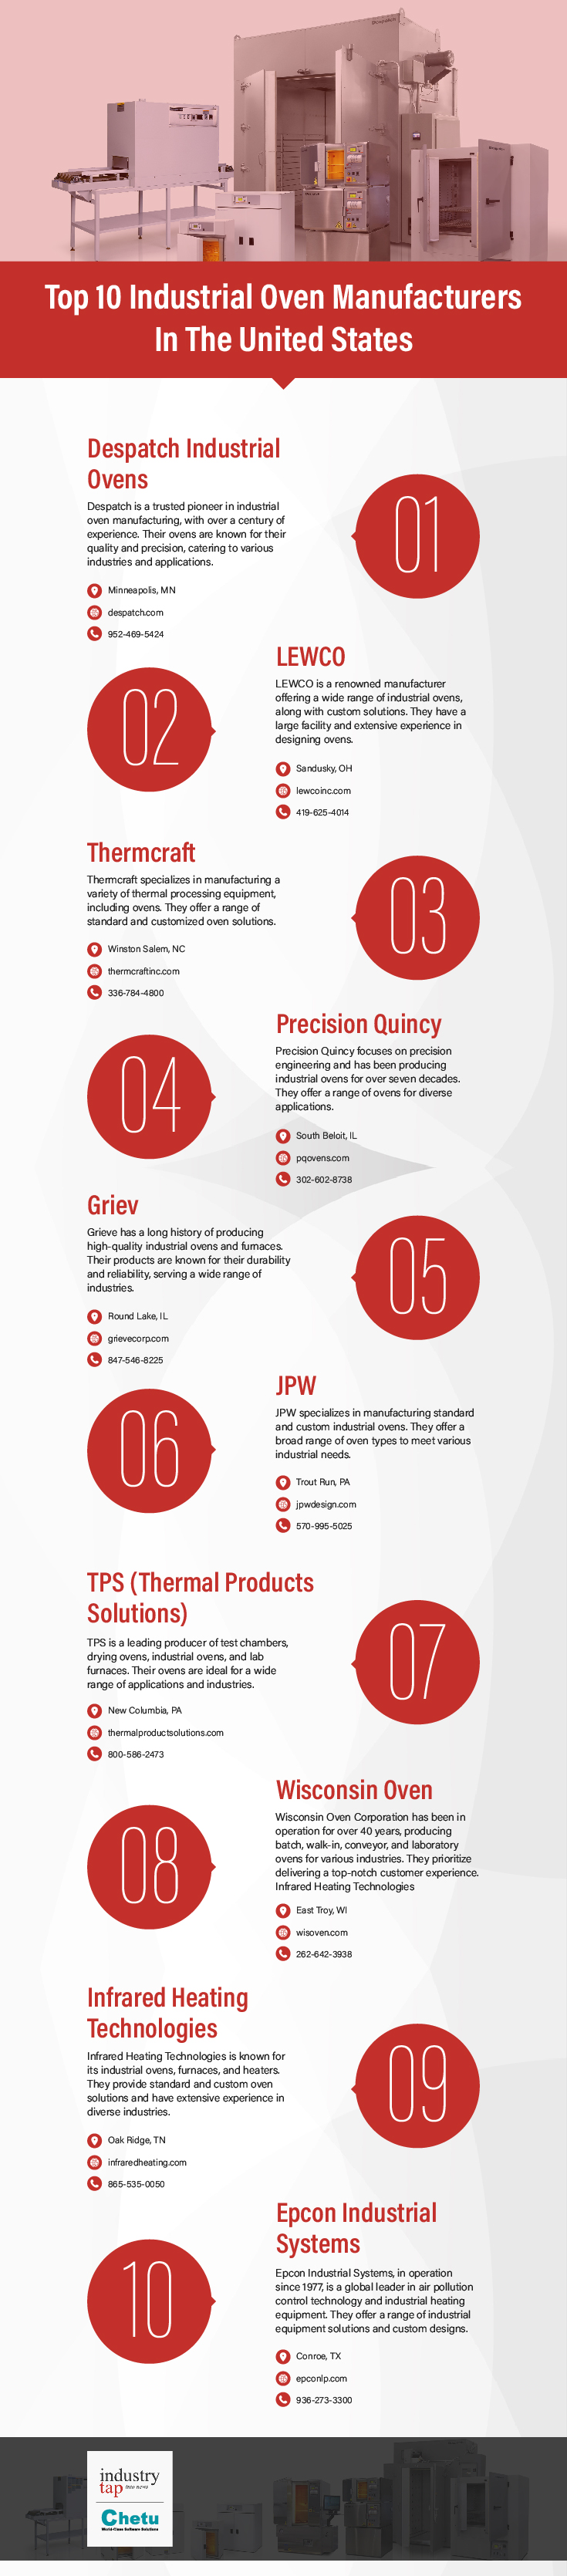 Top 10 Industrial Oven Manufacturers - Infographic